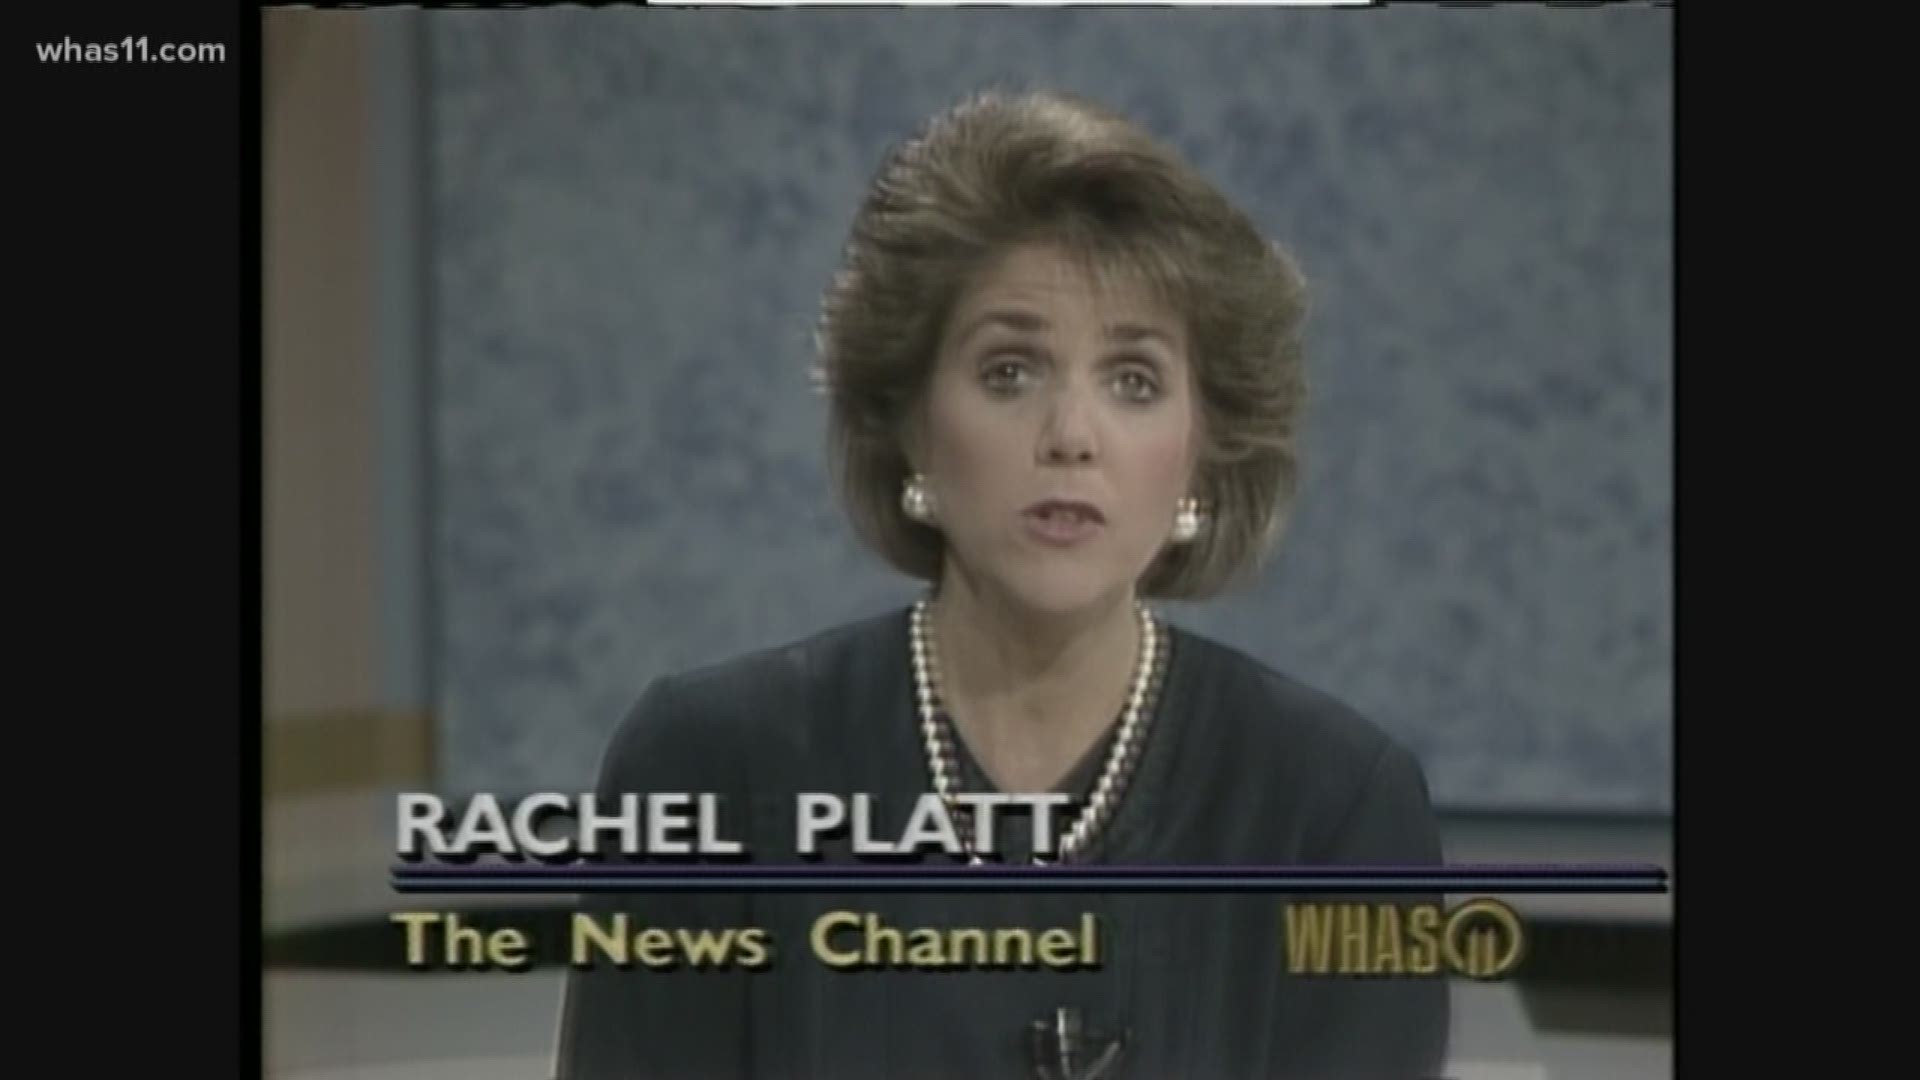 WHAS11 anchor Rachel Platt remembers her career in Louisville, coworkers and interviewees who have changed her life and viewers who she cannot thank enough.